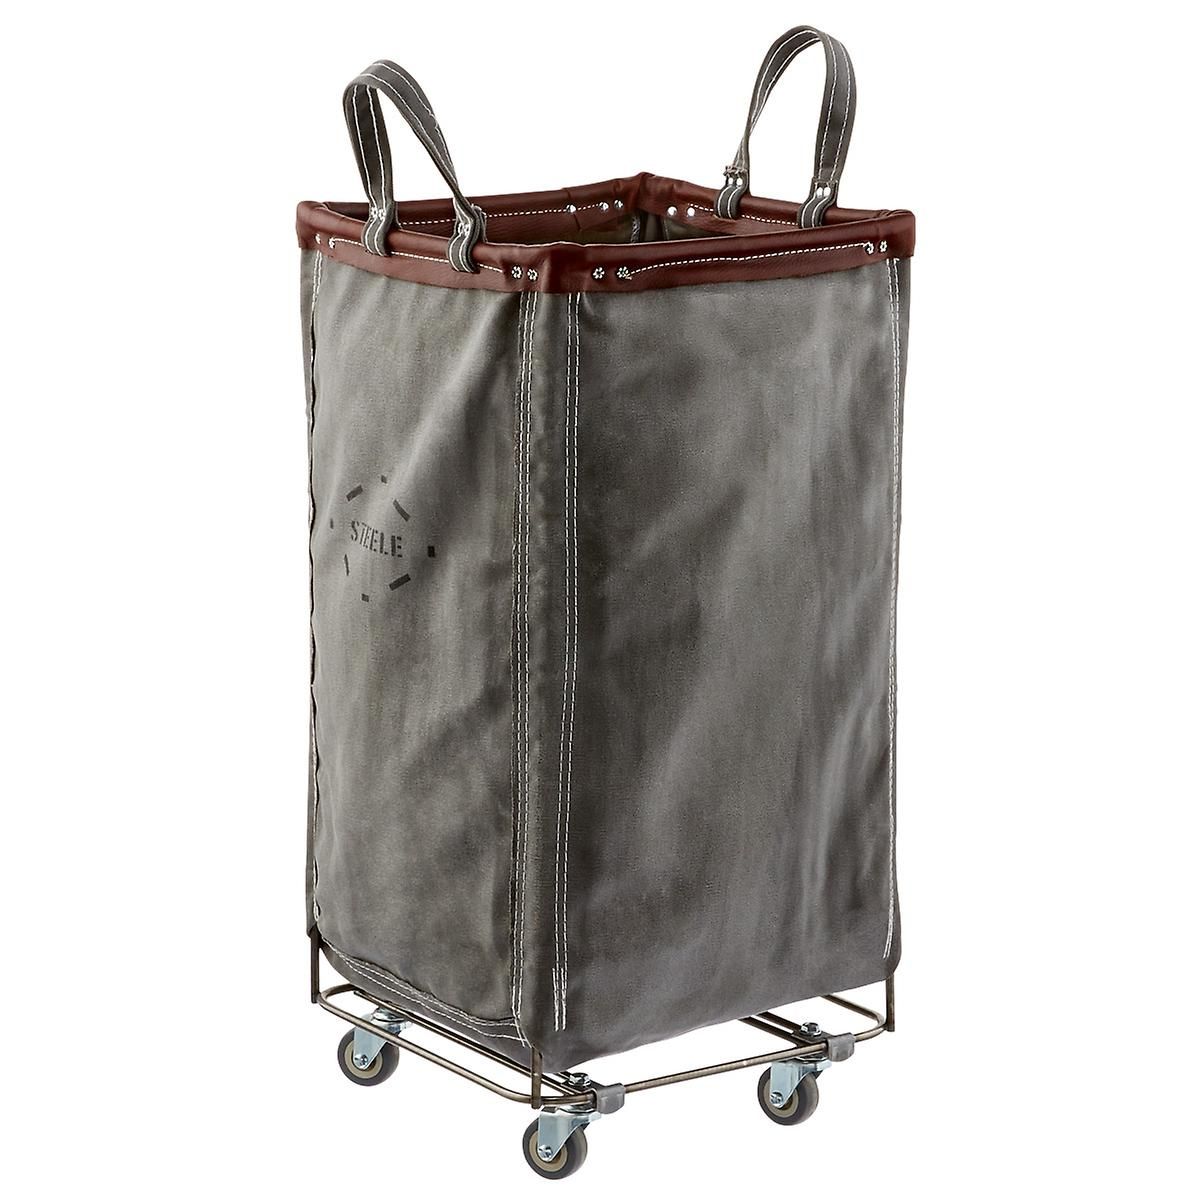 Steele Canvas Grey & Brown Leather Squared Sorting Hamper | The Container Store